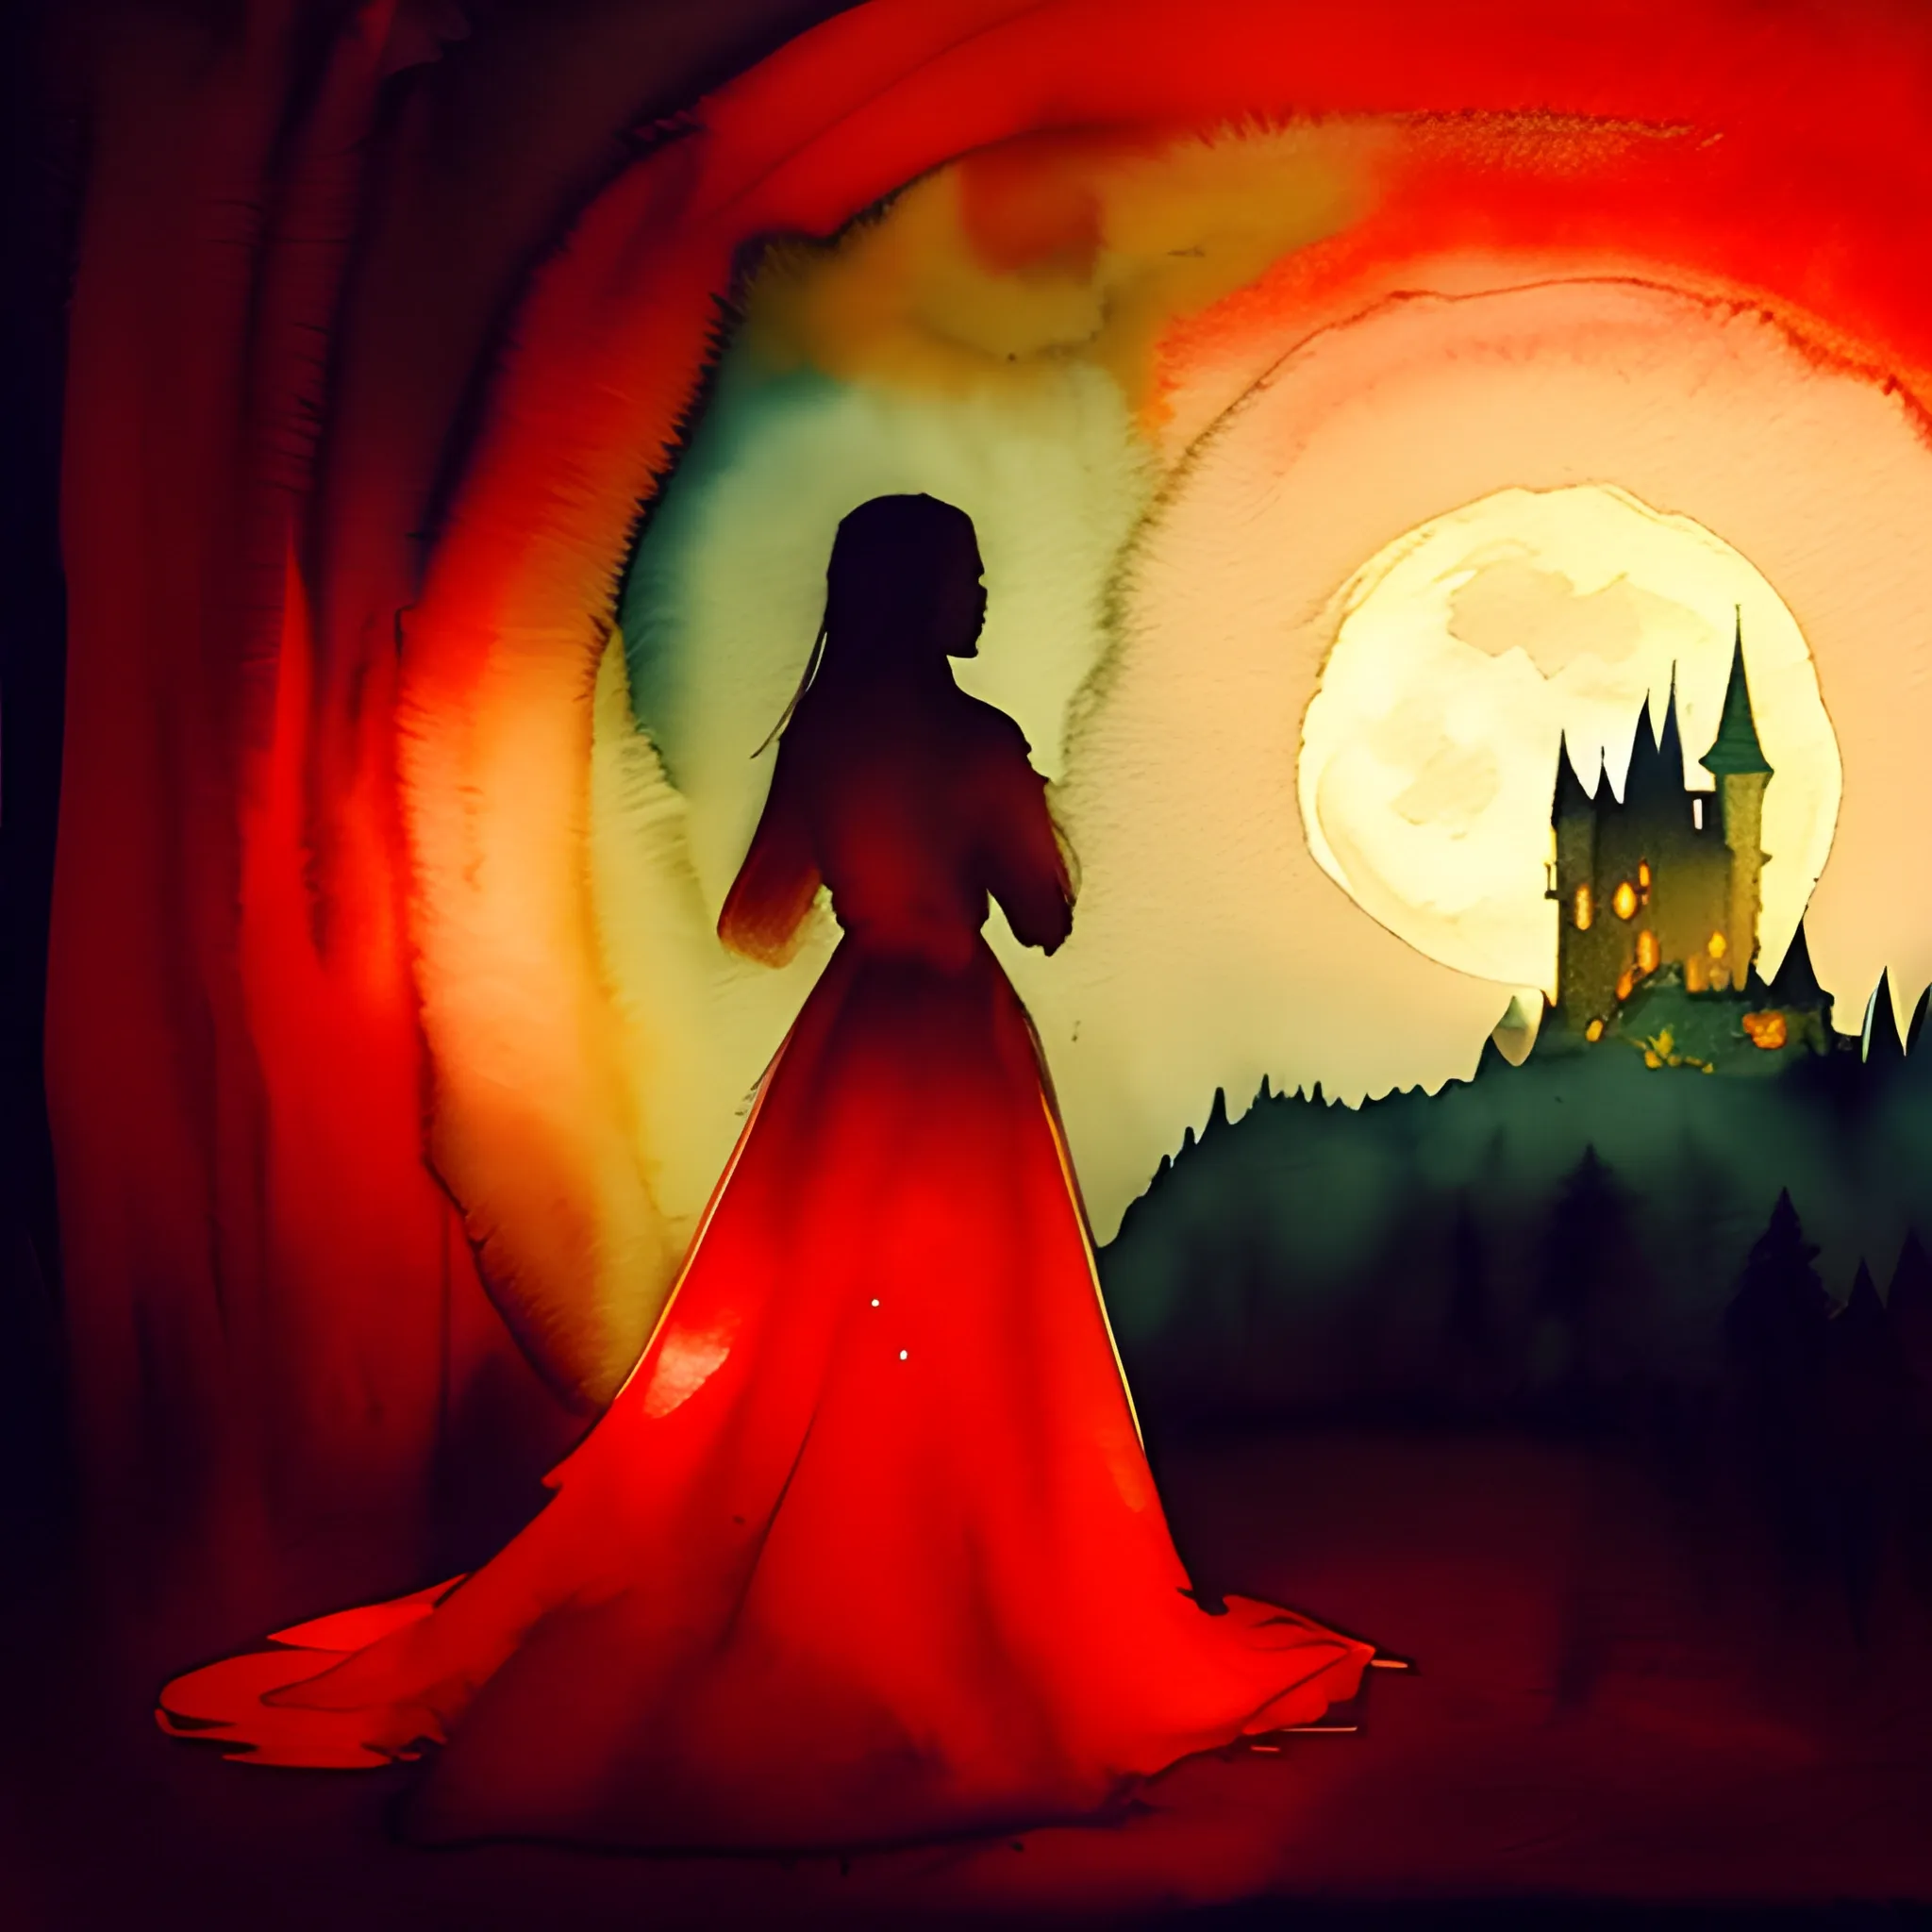 Illustrate a captivating scene of a woman, guided by the soft glow of a full moon, discovering a majestic castle nestled in the darkness. Utilize watercolor techniques reminiscent of the renowned painter J.M.W. Turner, with the predominant use of the color red to evoke a sense of enchantment